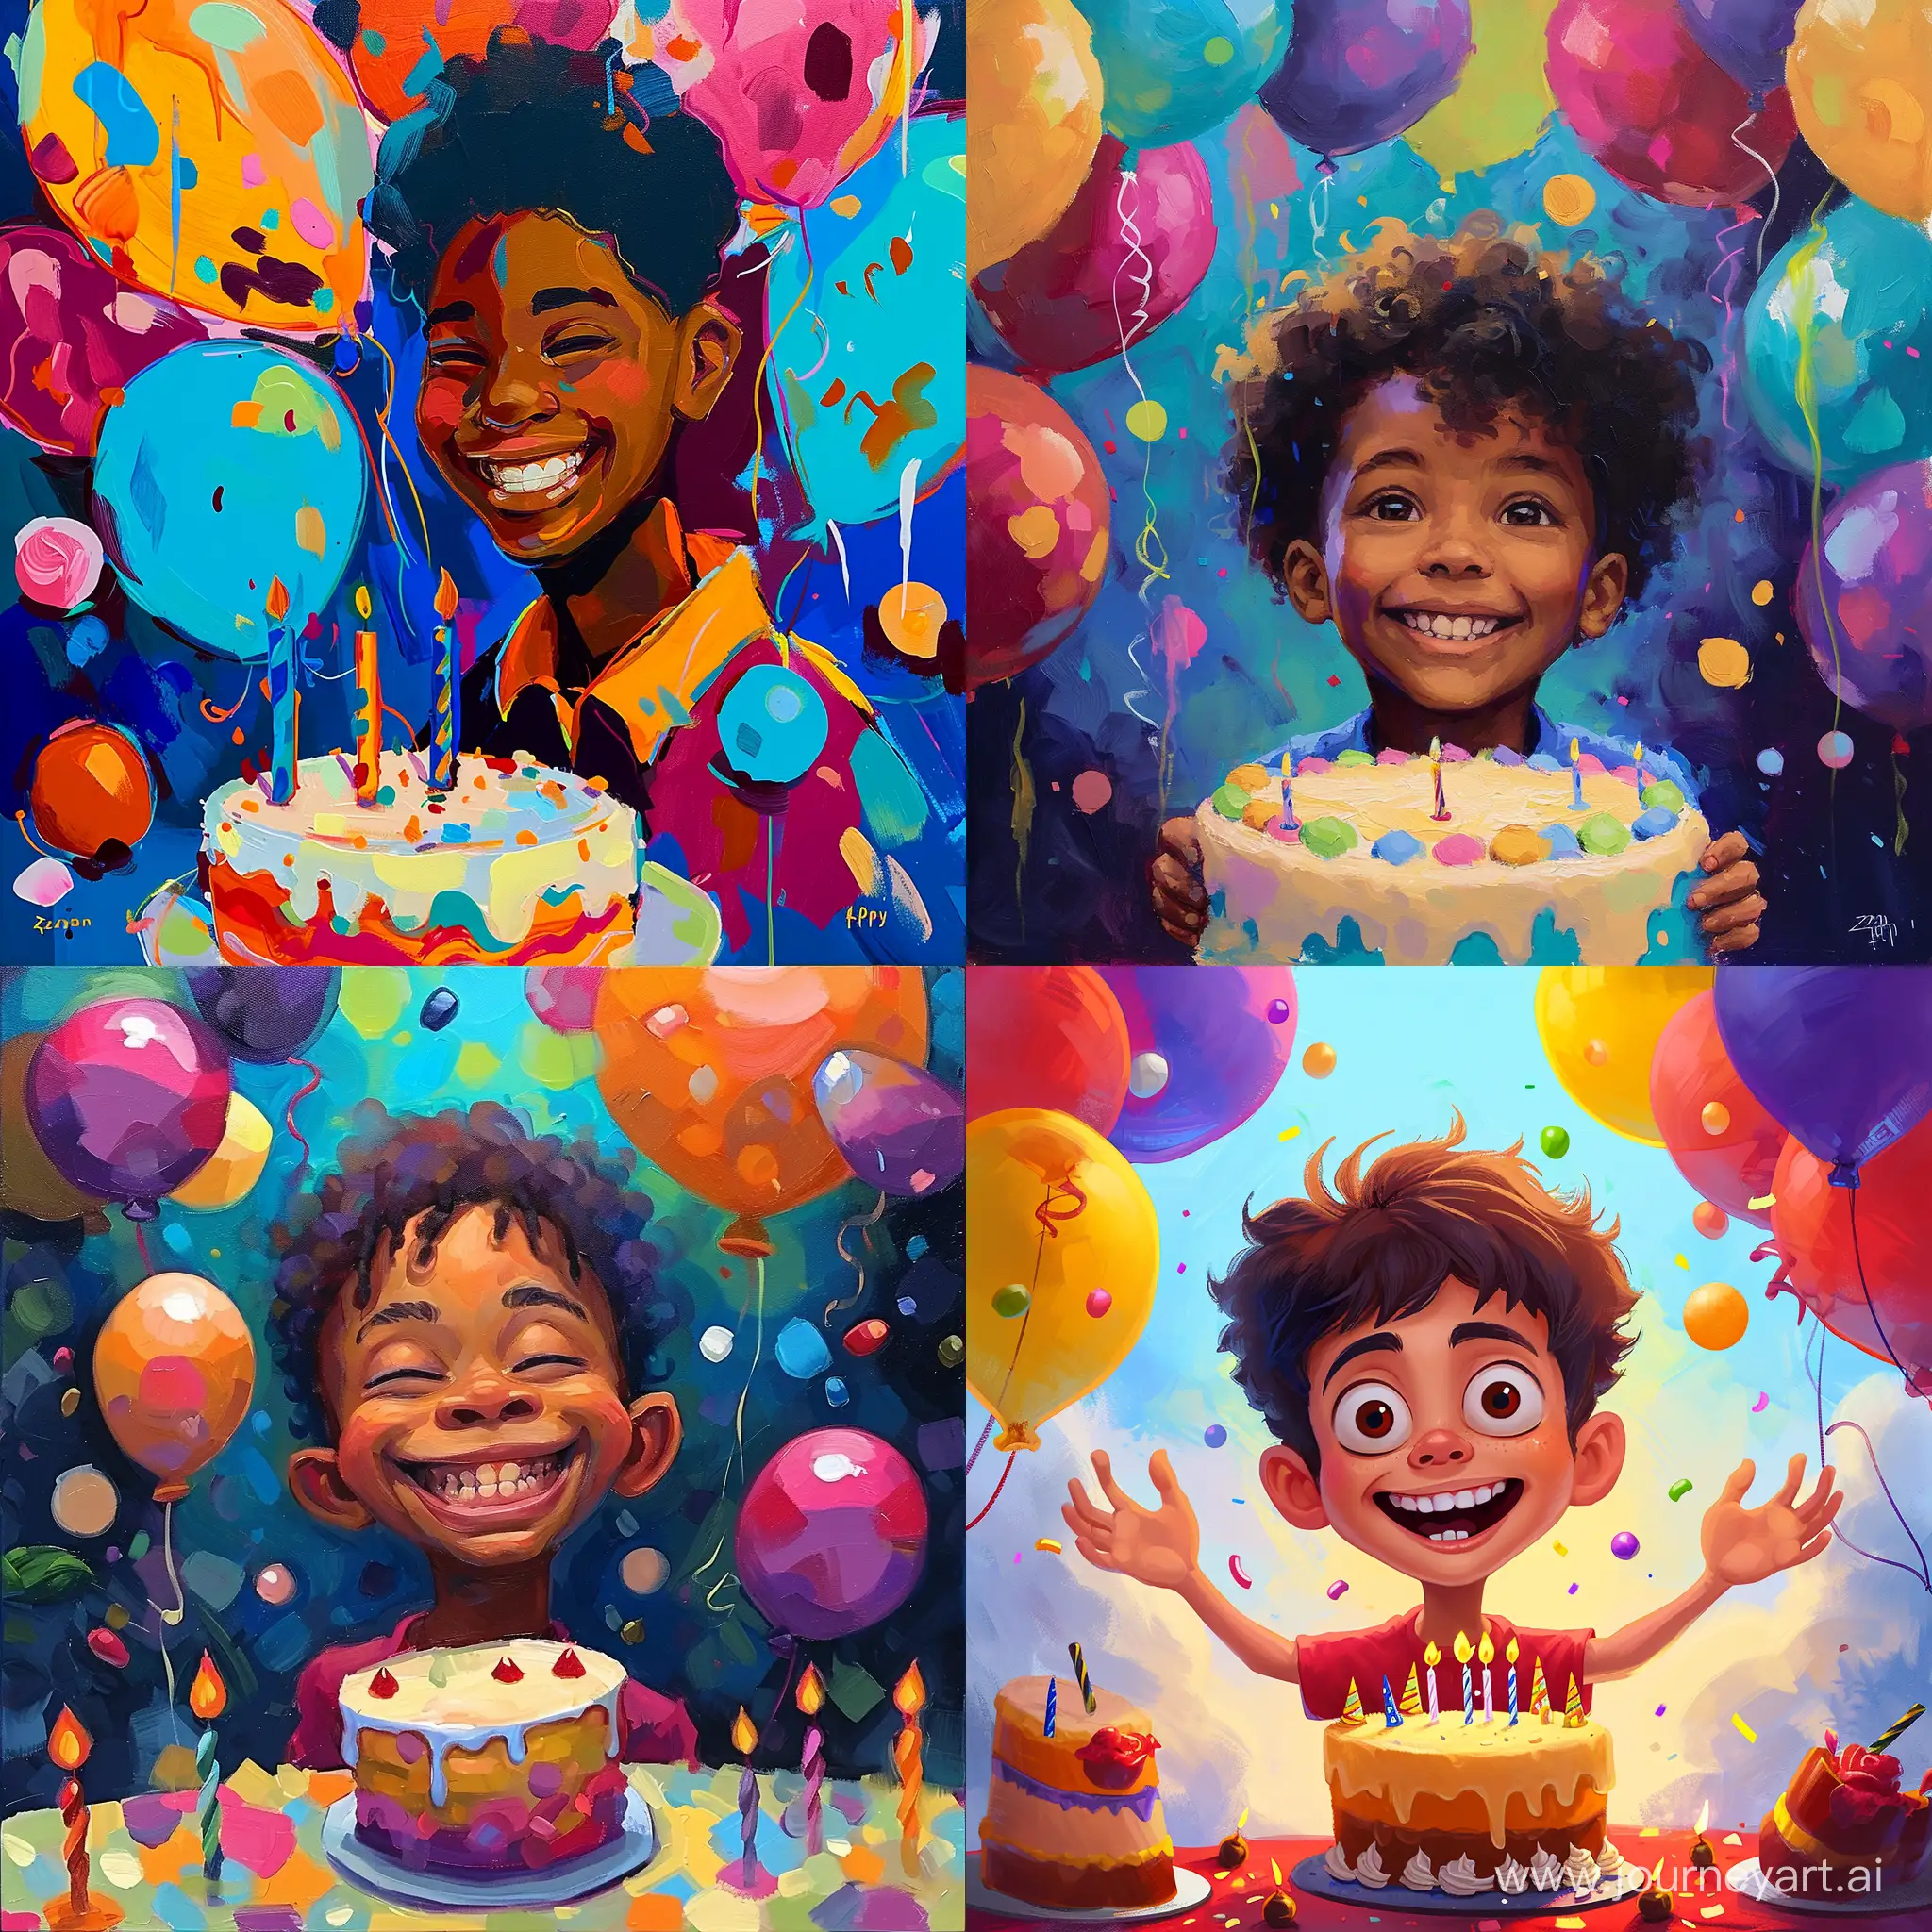 Happy Birthday, Zabin Dive into the vibrant magic of joy, surrounded by his joyful smile, a dreamy cake, and festive balloons. Let's celebrate this special day in style